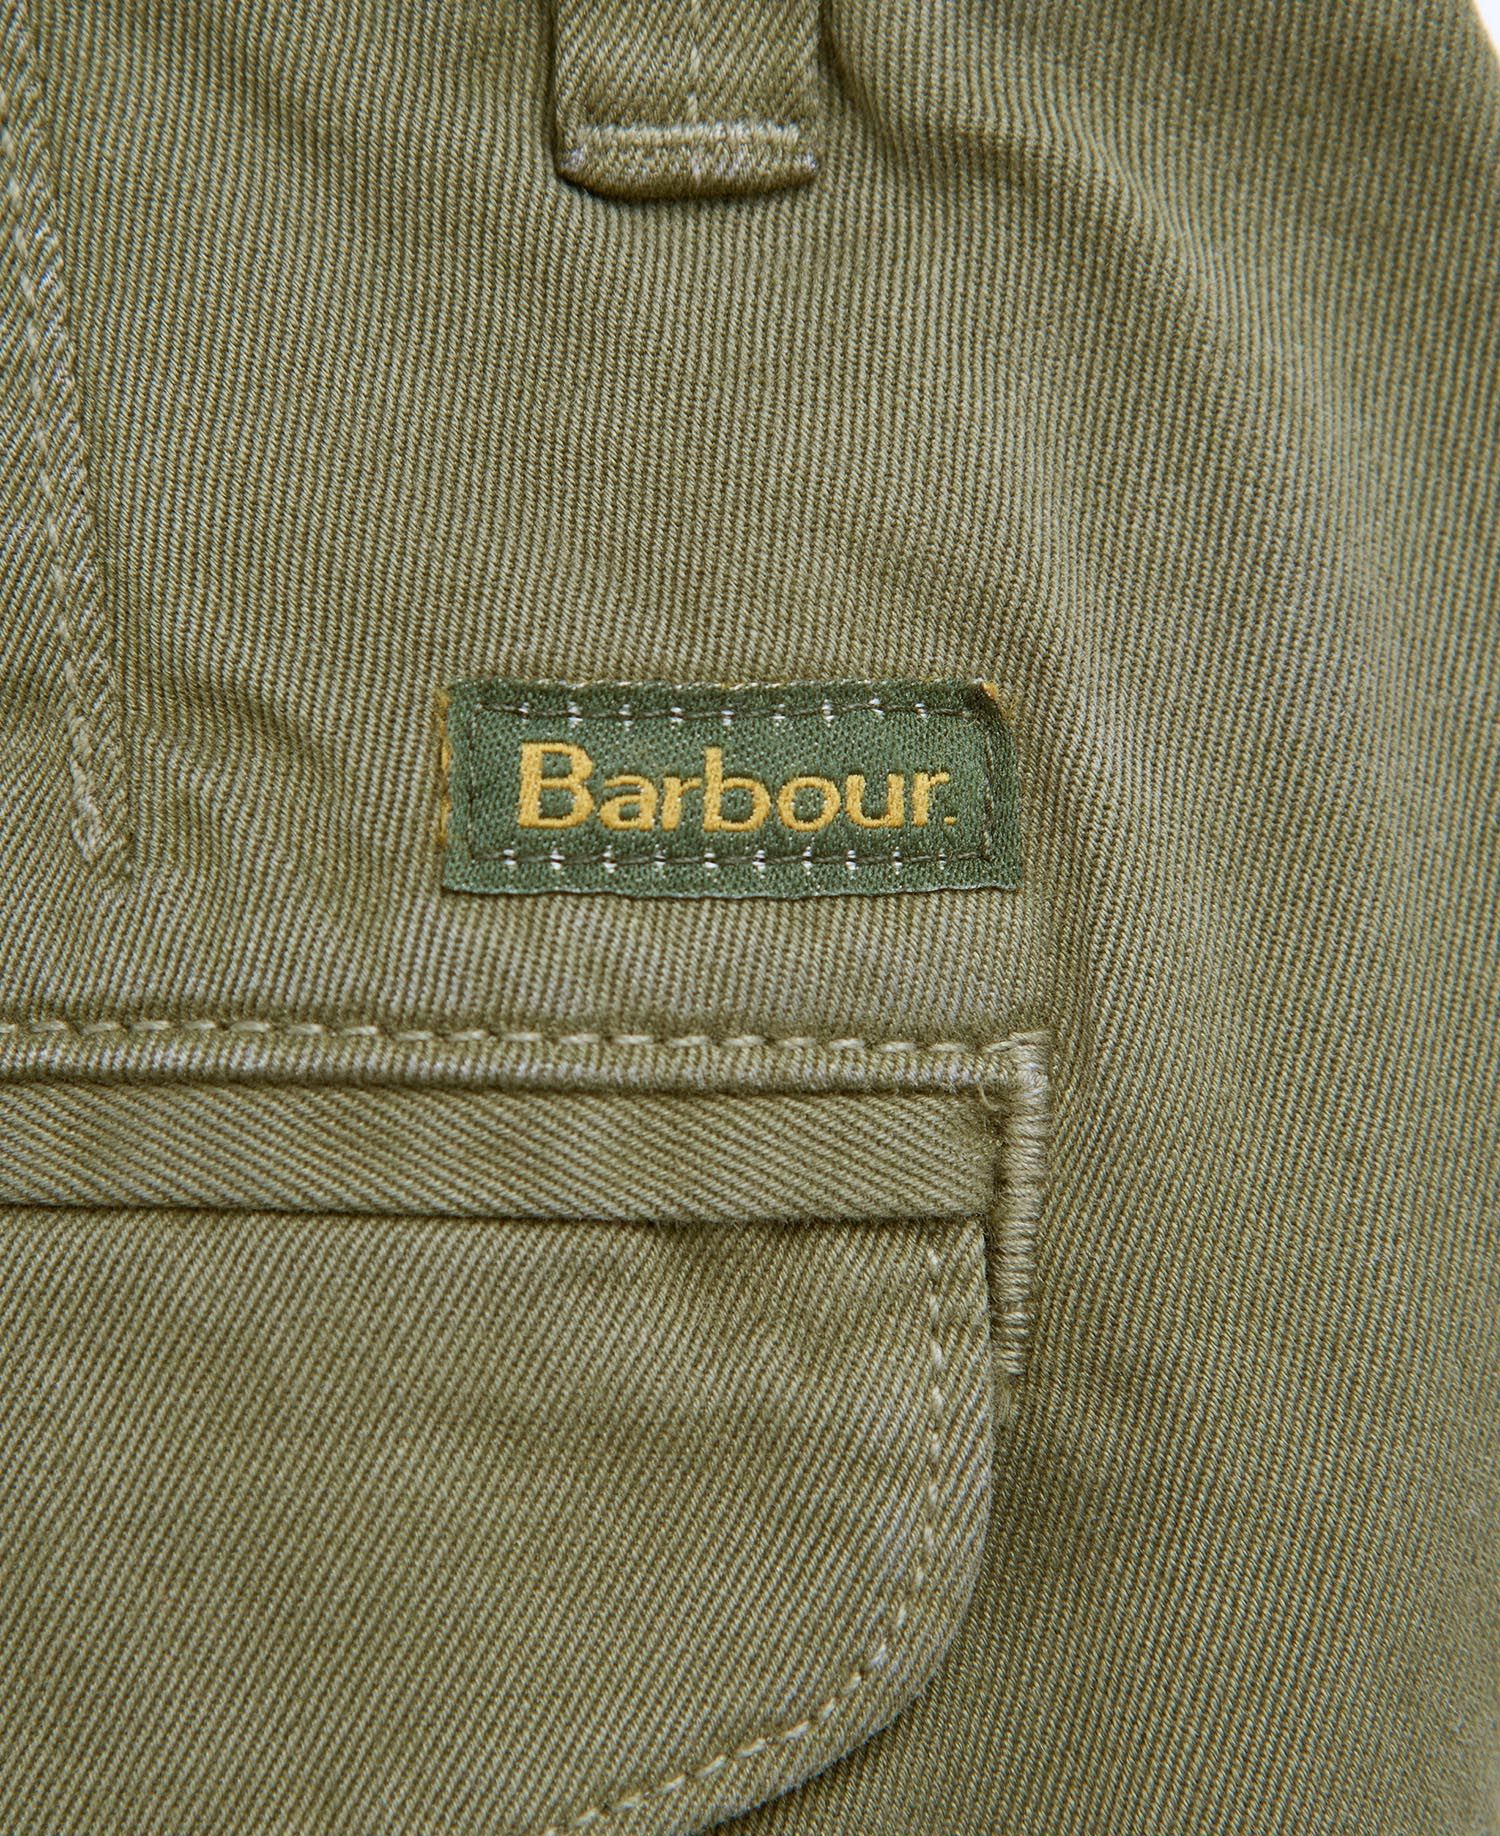 Shop the Barbour Neuston Twill Trousers in Green | Barbour